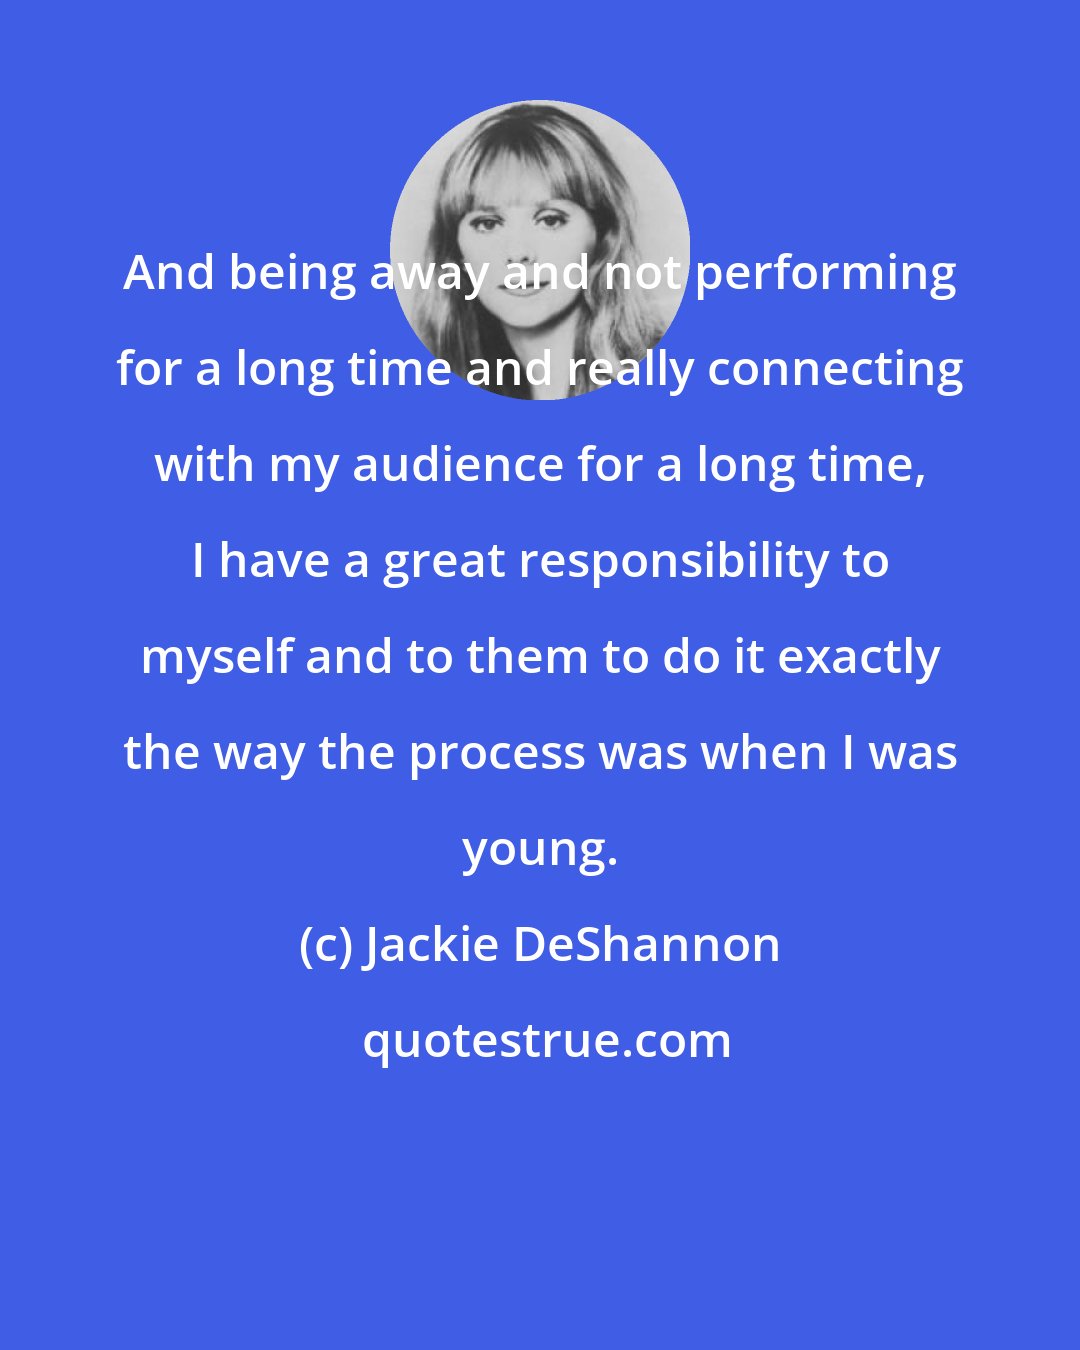 Jackie DeShannon: And being away and not performing for a long time and really connecting with my audience for a long time, I have a great responsibility to myself and to them to do it exactly the way the process was when I was young.